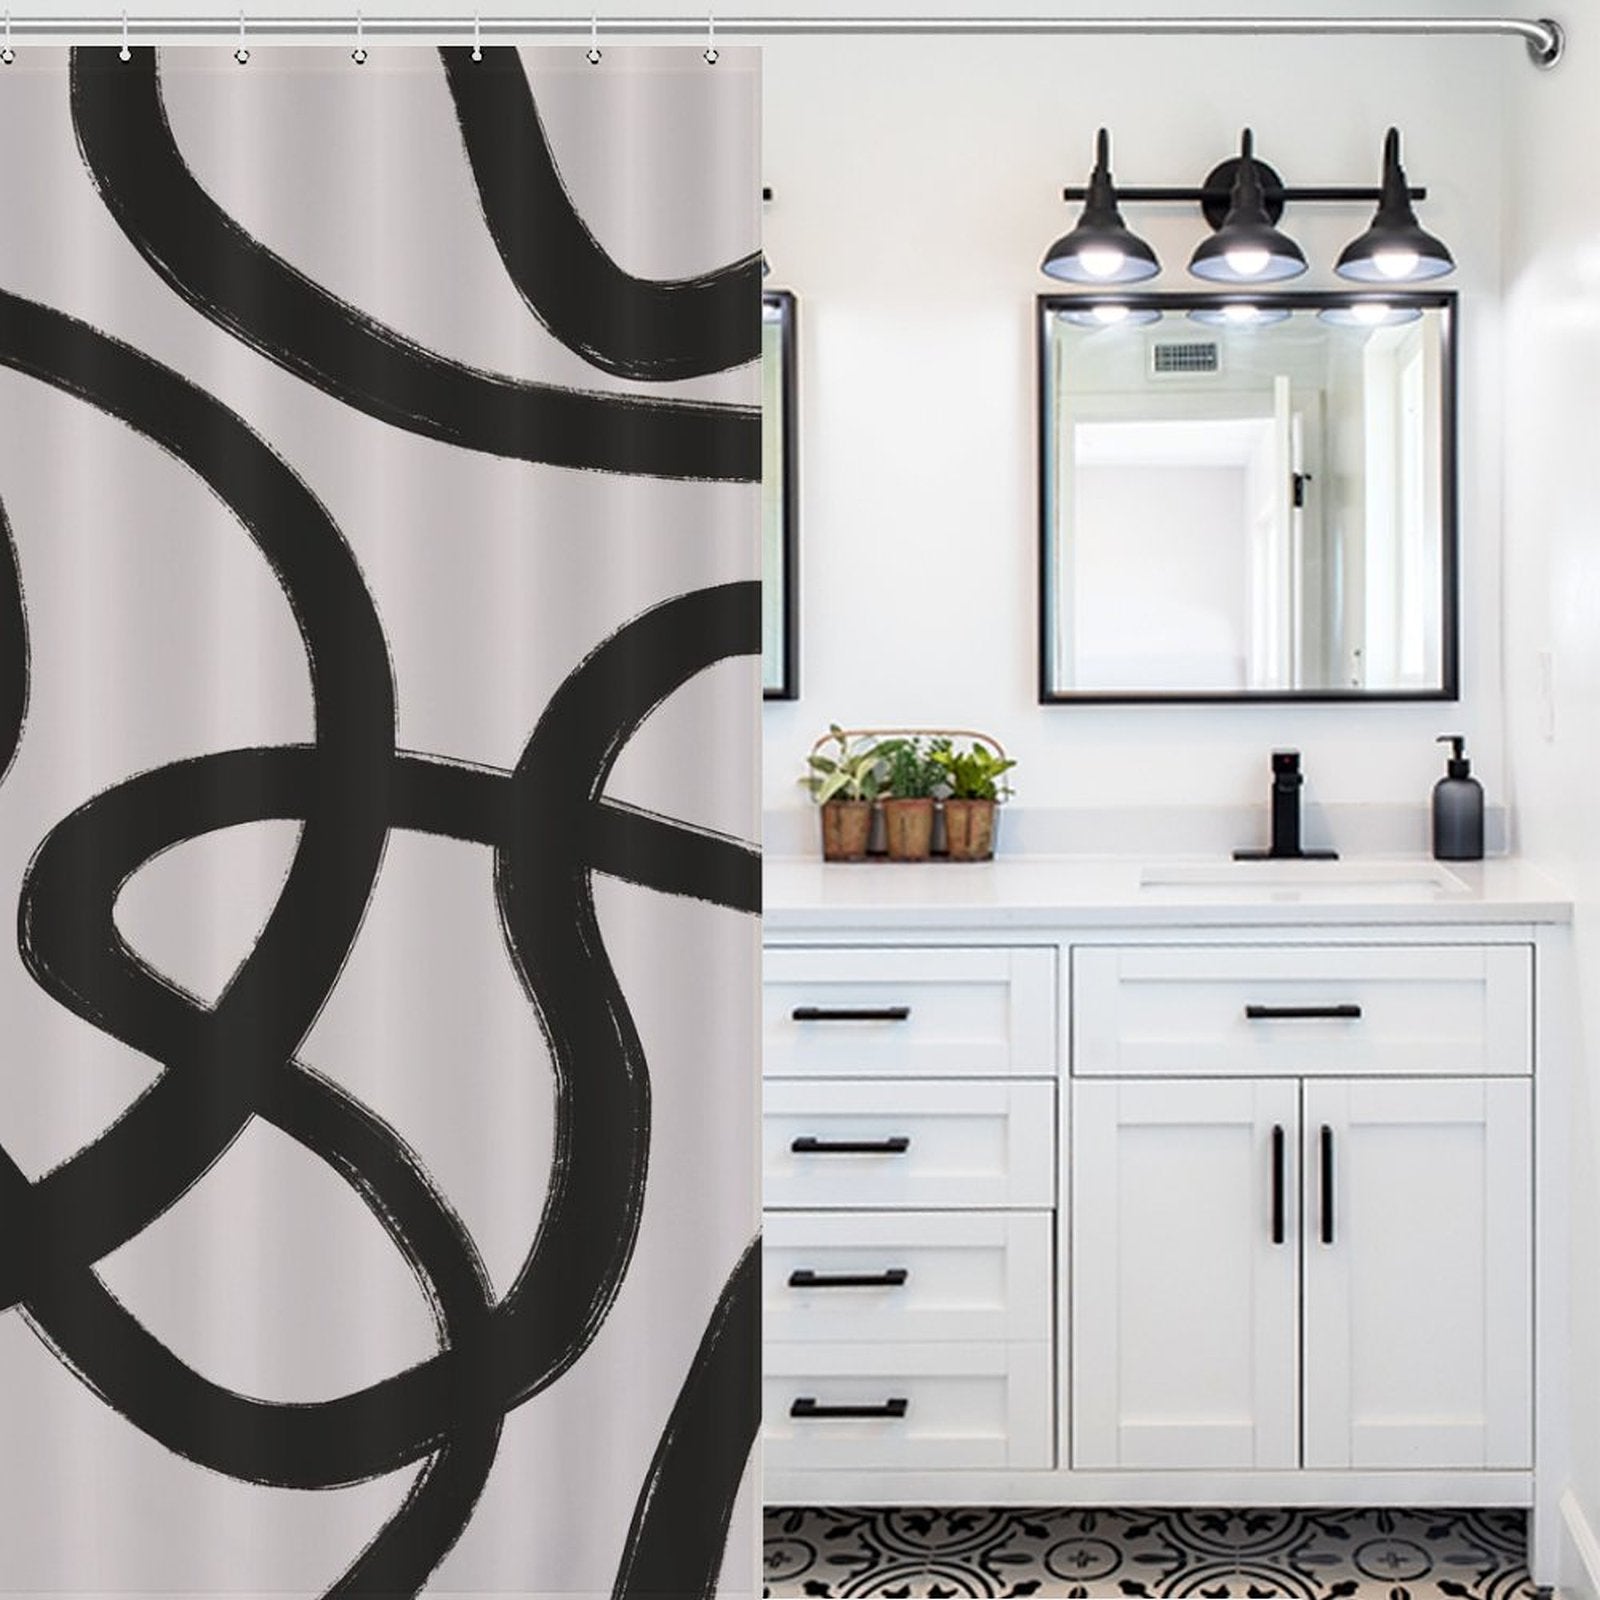 A modern bathroom with white cabinets, black hardware, a black and white patterned floor, and a large mirror. The Modern Geometric Art Minimalist Curve Black Line Black and Grey Abstract Shower Curtain-Cottoncat by Cotton Cat features minimalist black curve lines on a light gray background.